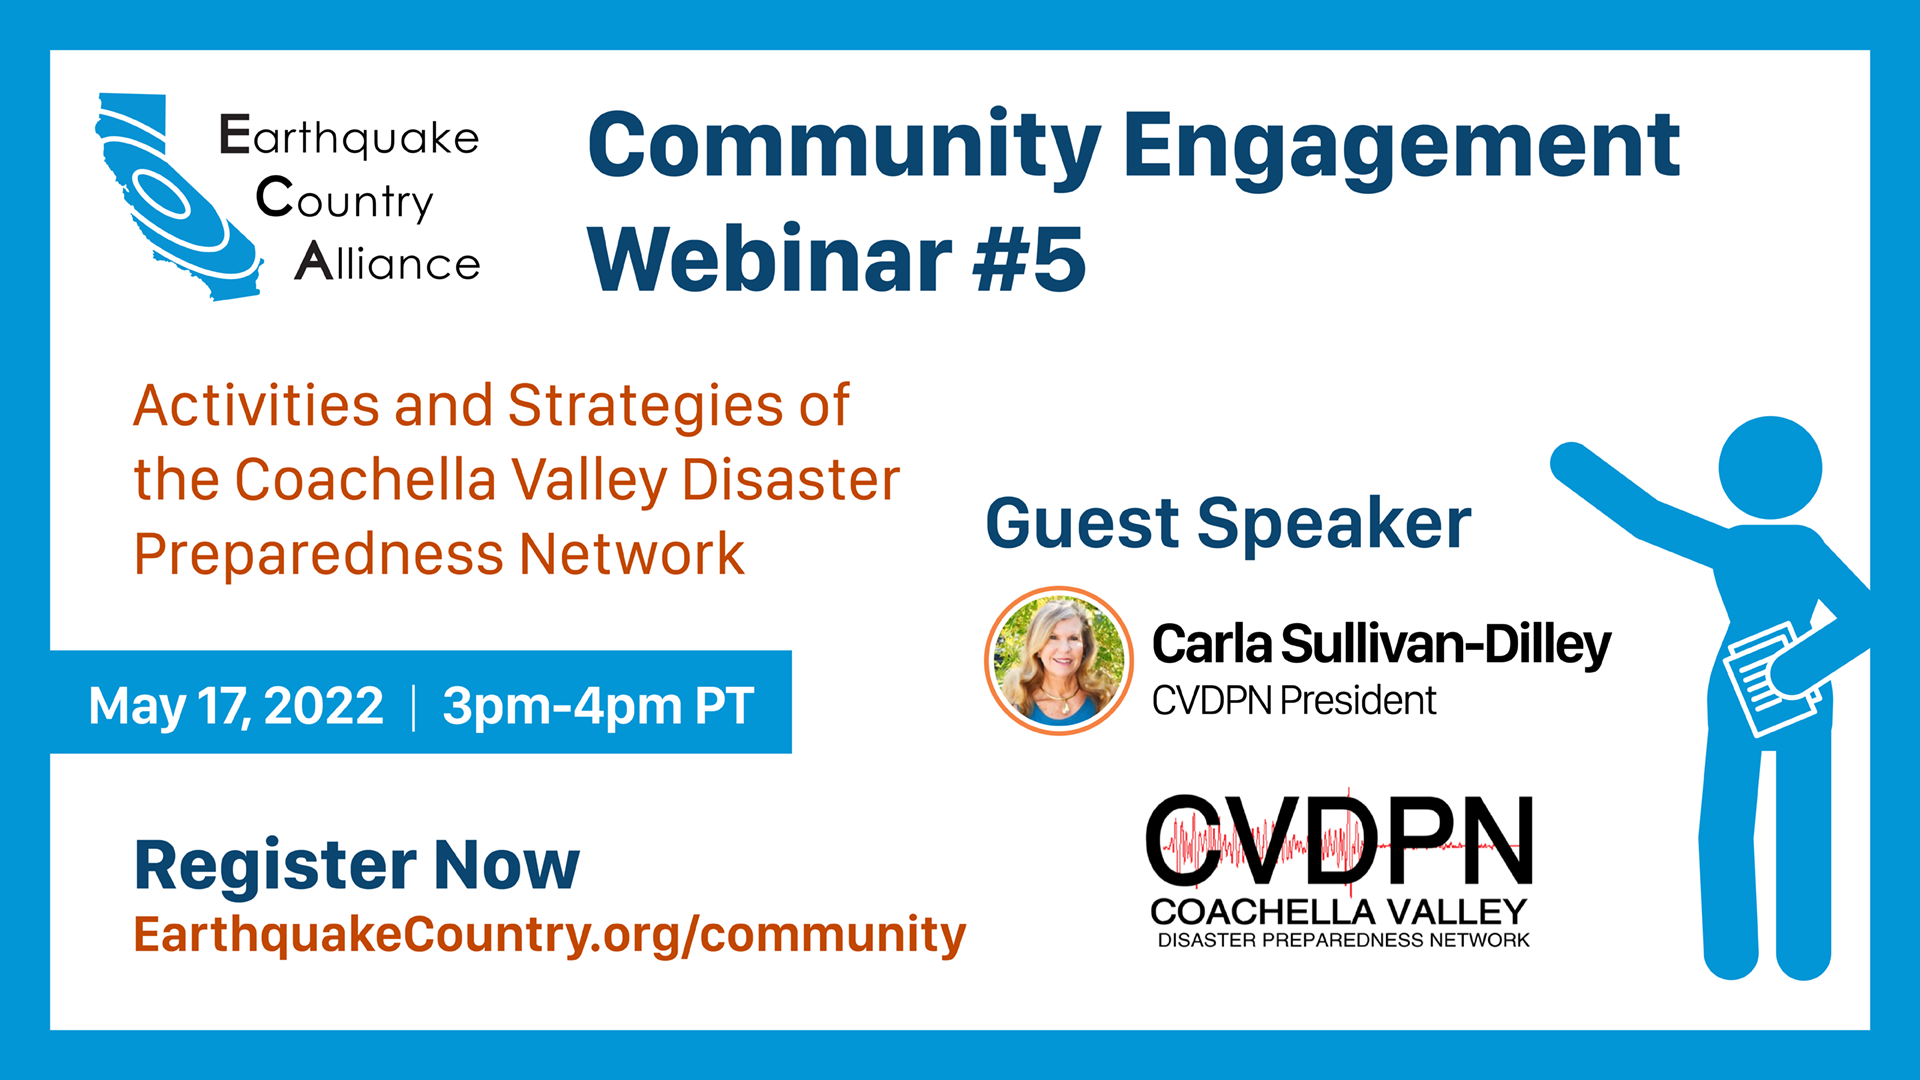 Illustration of presenter introducing the Community Engagement Webinar #5, the CVDPN logo, and a picture of CVDPN president, Carla Sullivan-Dilley.